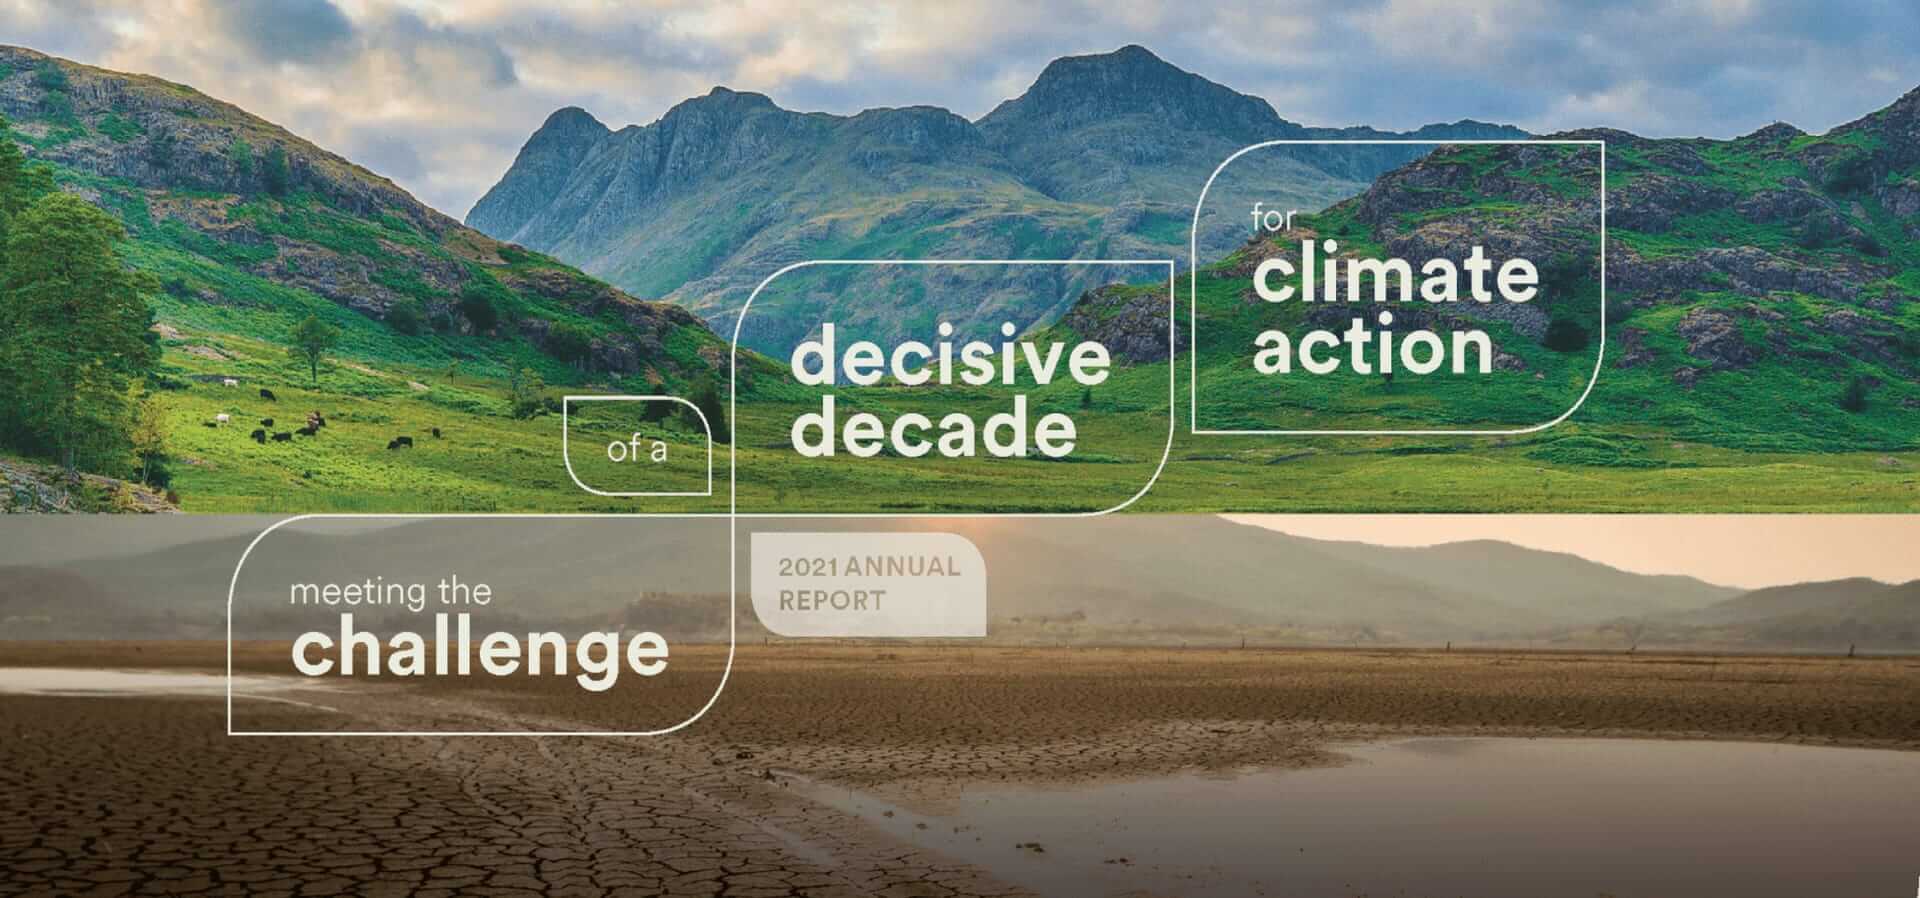 ClimateWorks’ 2021 Annual Report: Meeting the Challenge of a Decisive Decade for Climate Action